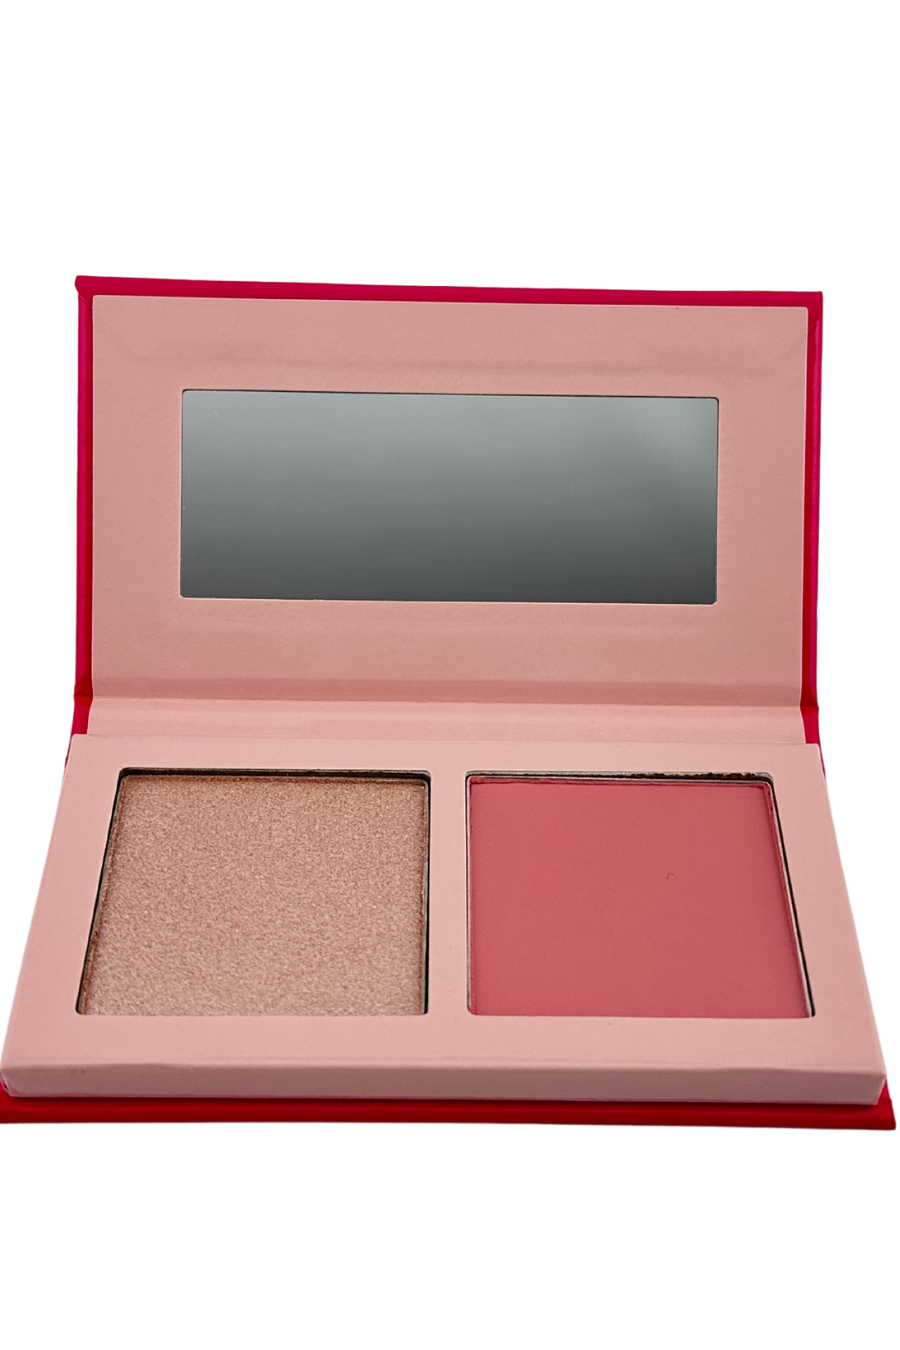 Feeling Sassy Blush and Highlighter Cheek Palette - Be You Boutique